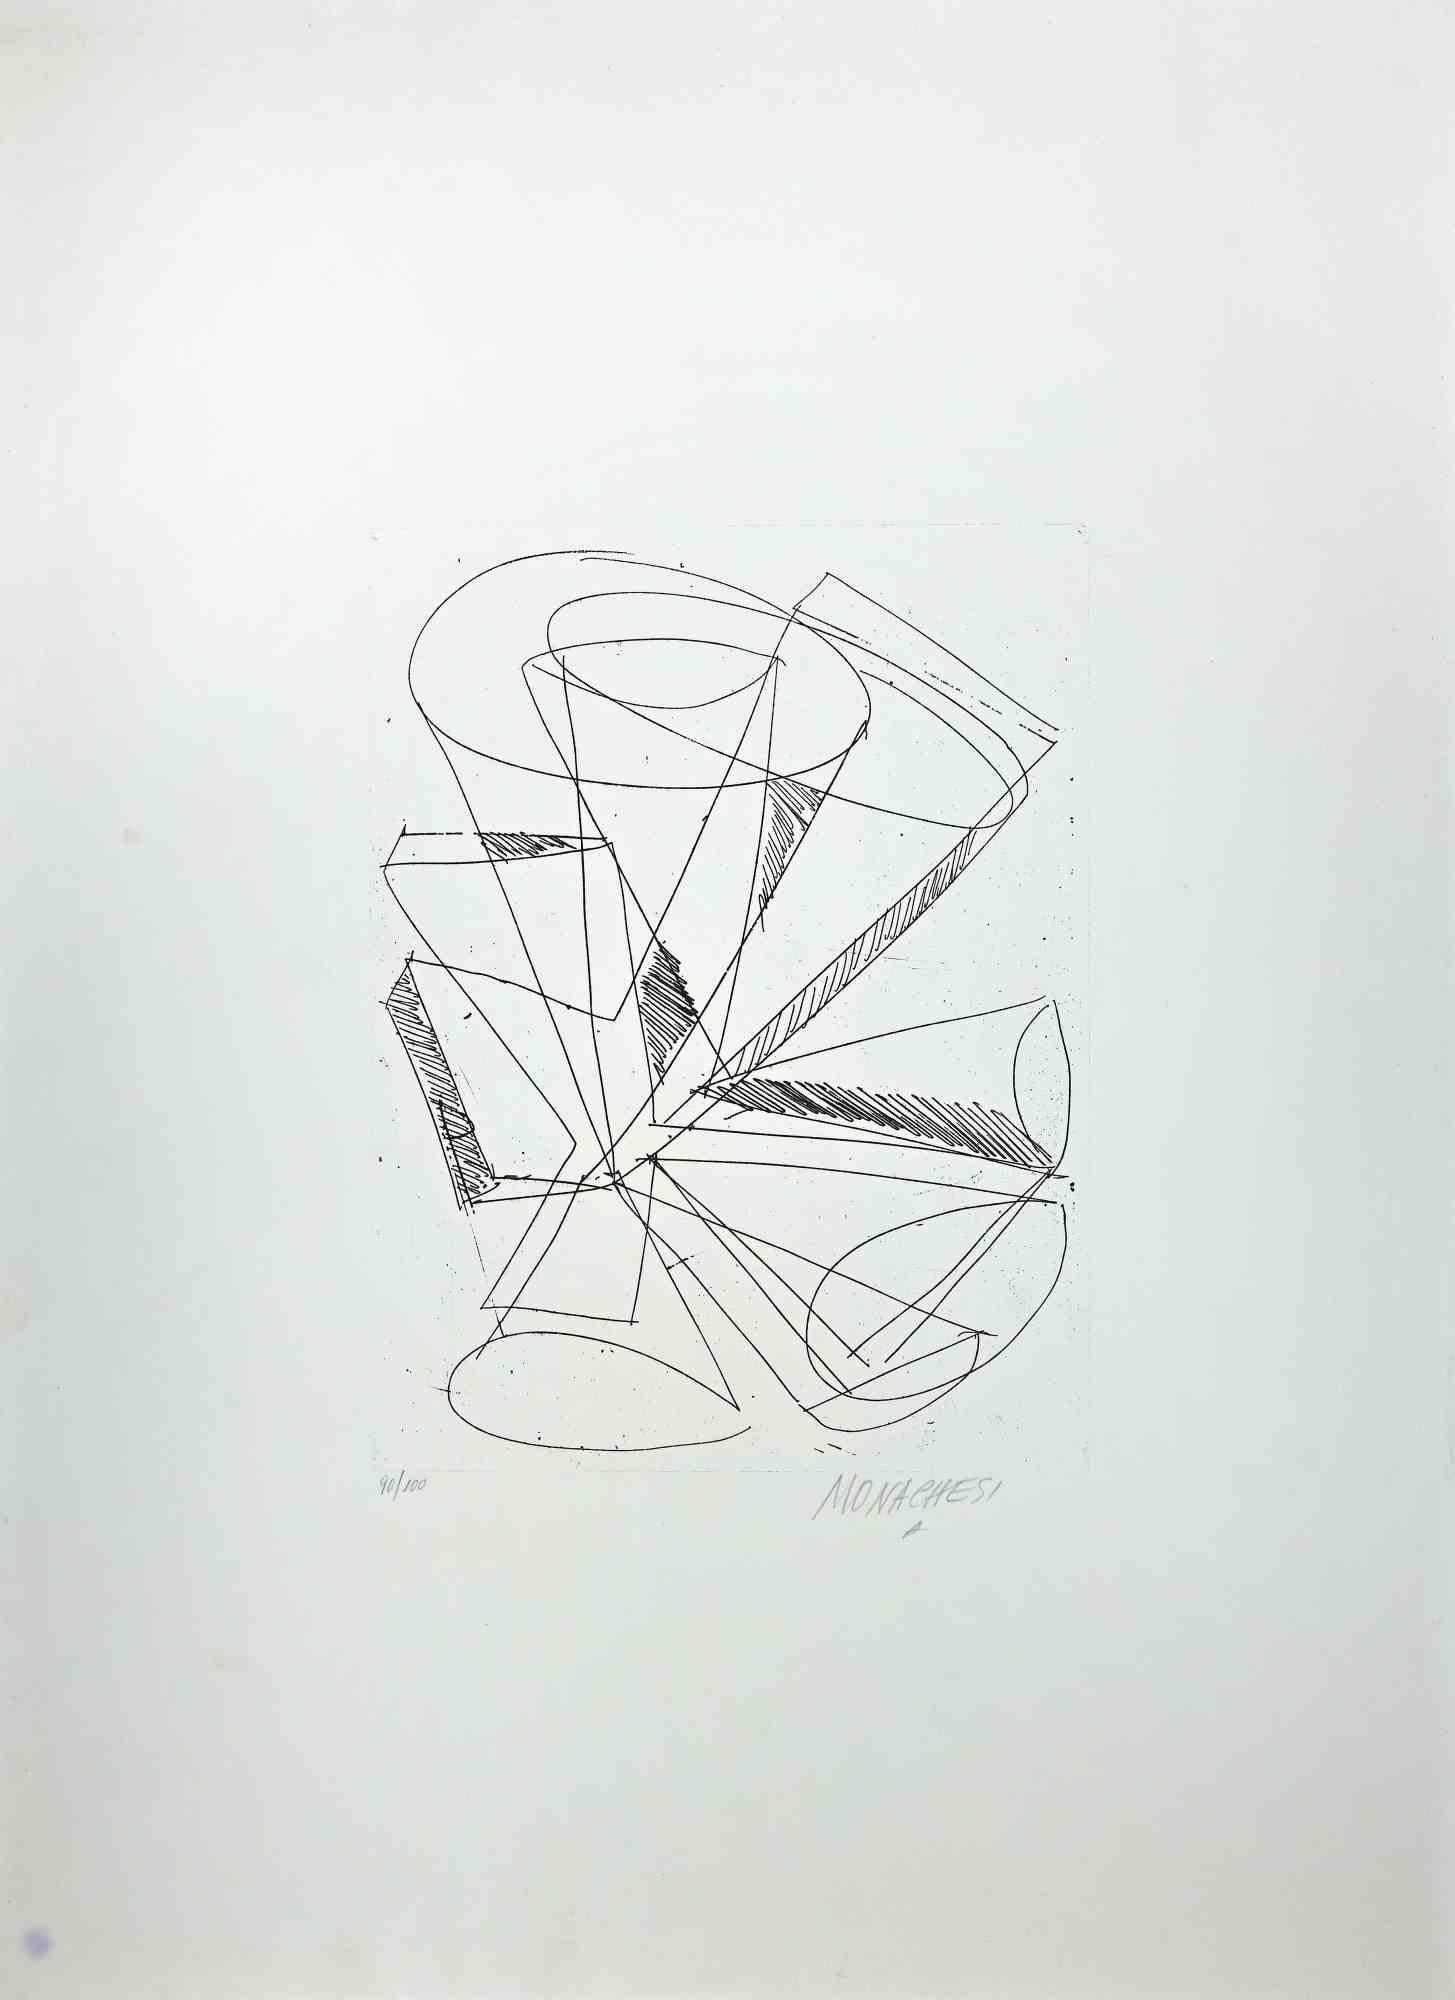 Geometric Abstract Composition is an original black and white etching realized by Sante Monachesi in the 1970s.

Hand-signed in pencil by the artist on the lower right. Numbered, edition of 90/100 prints.

Good conditions, except for very some